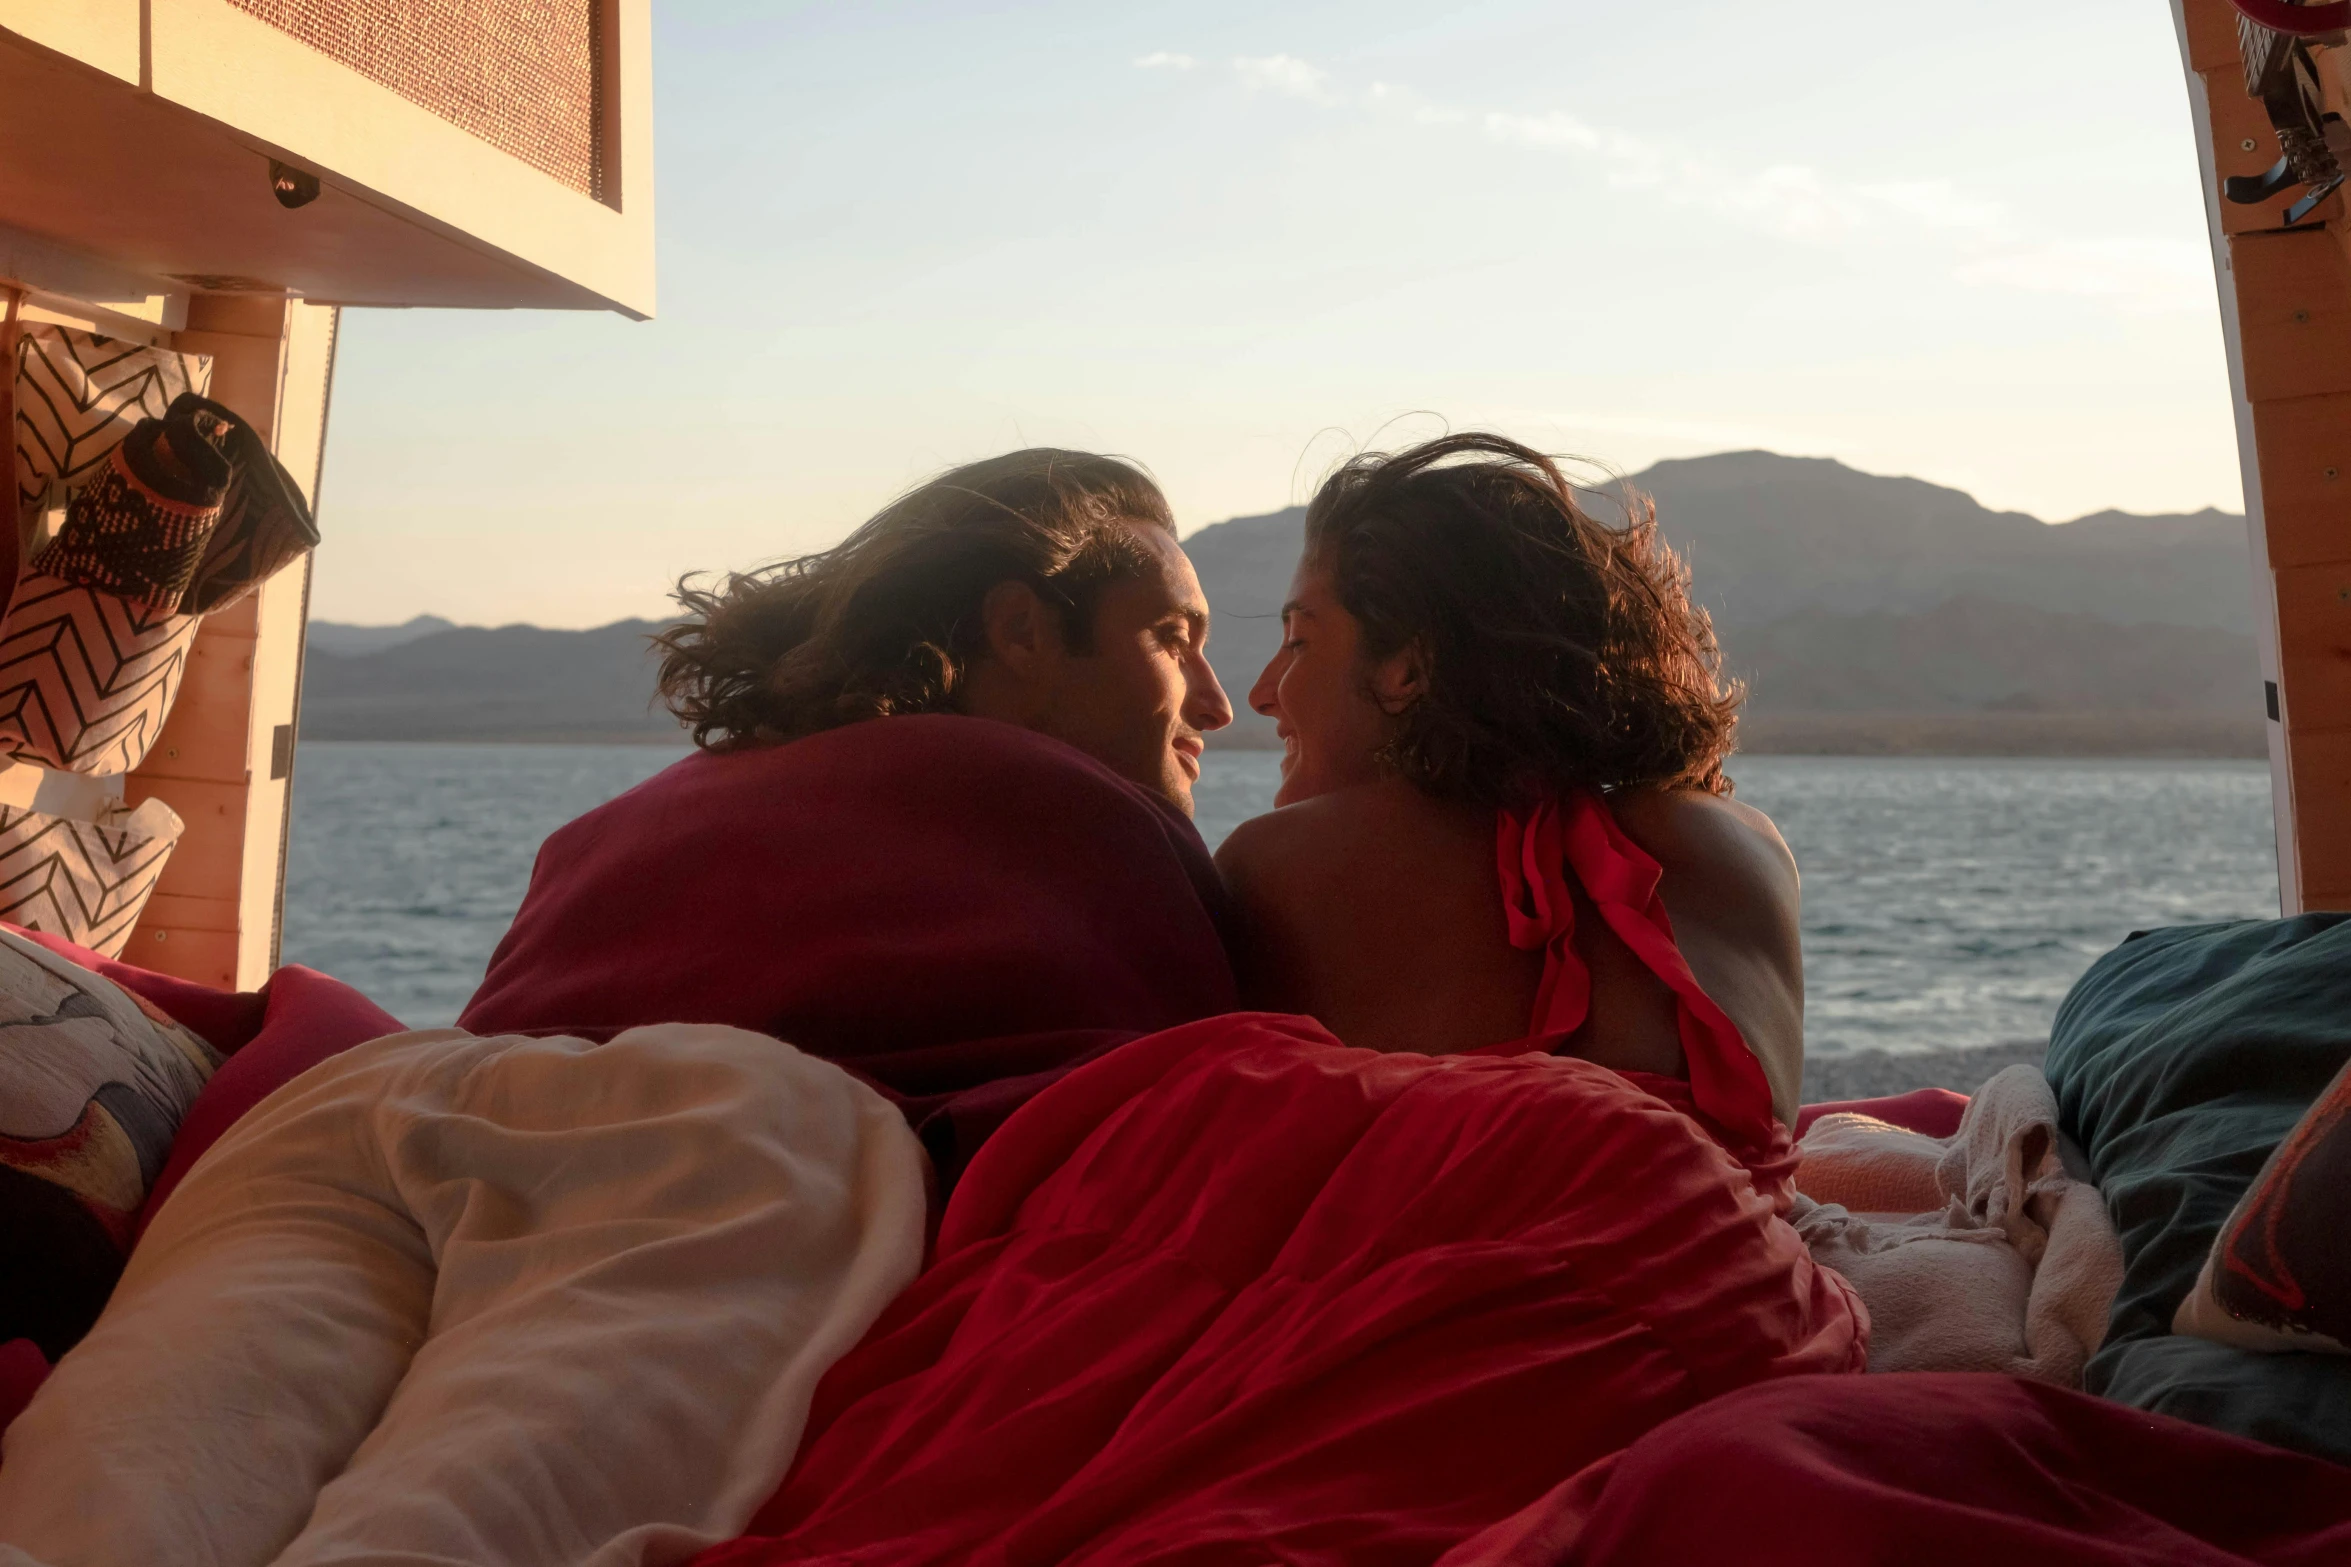 two people in bed looking at each other and sitting beside a lake